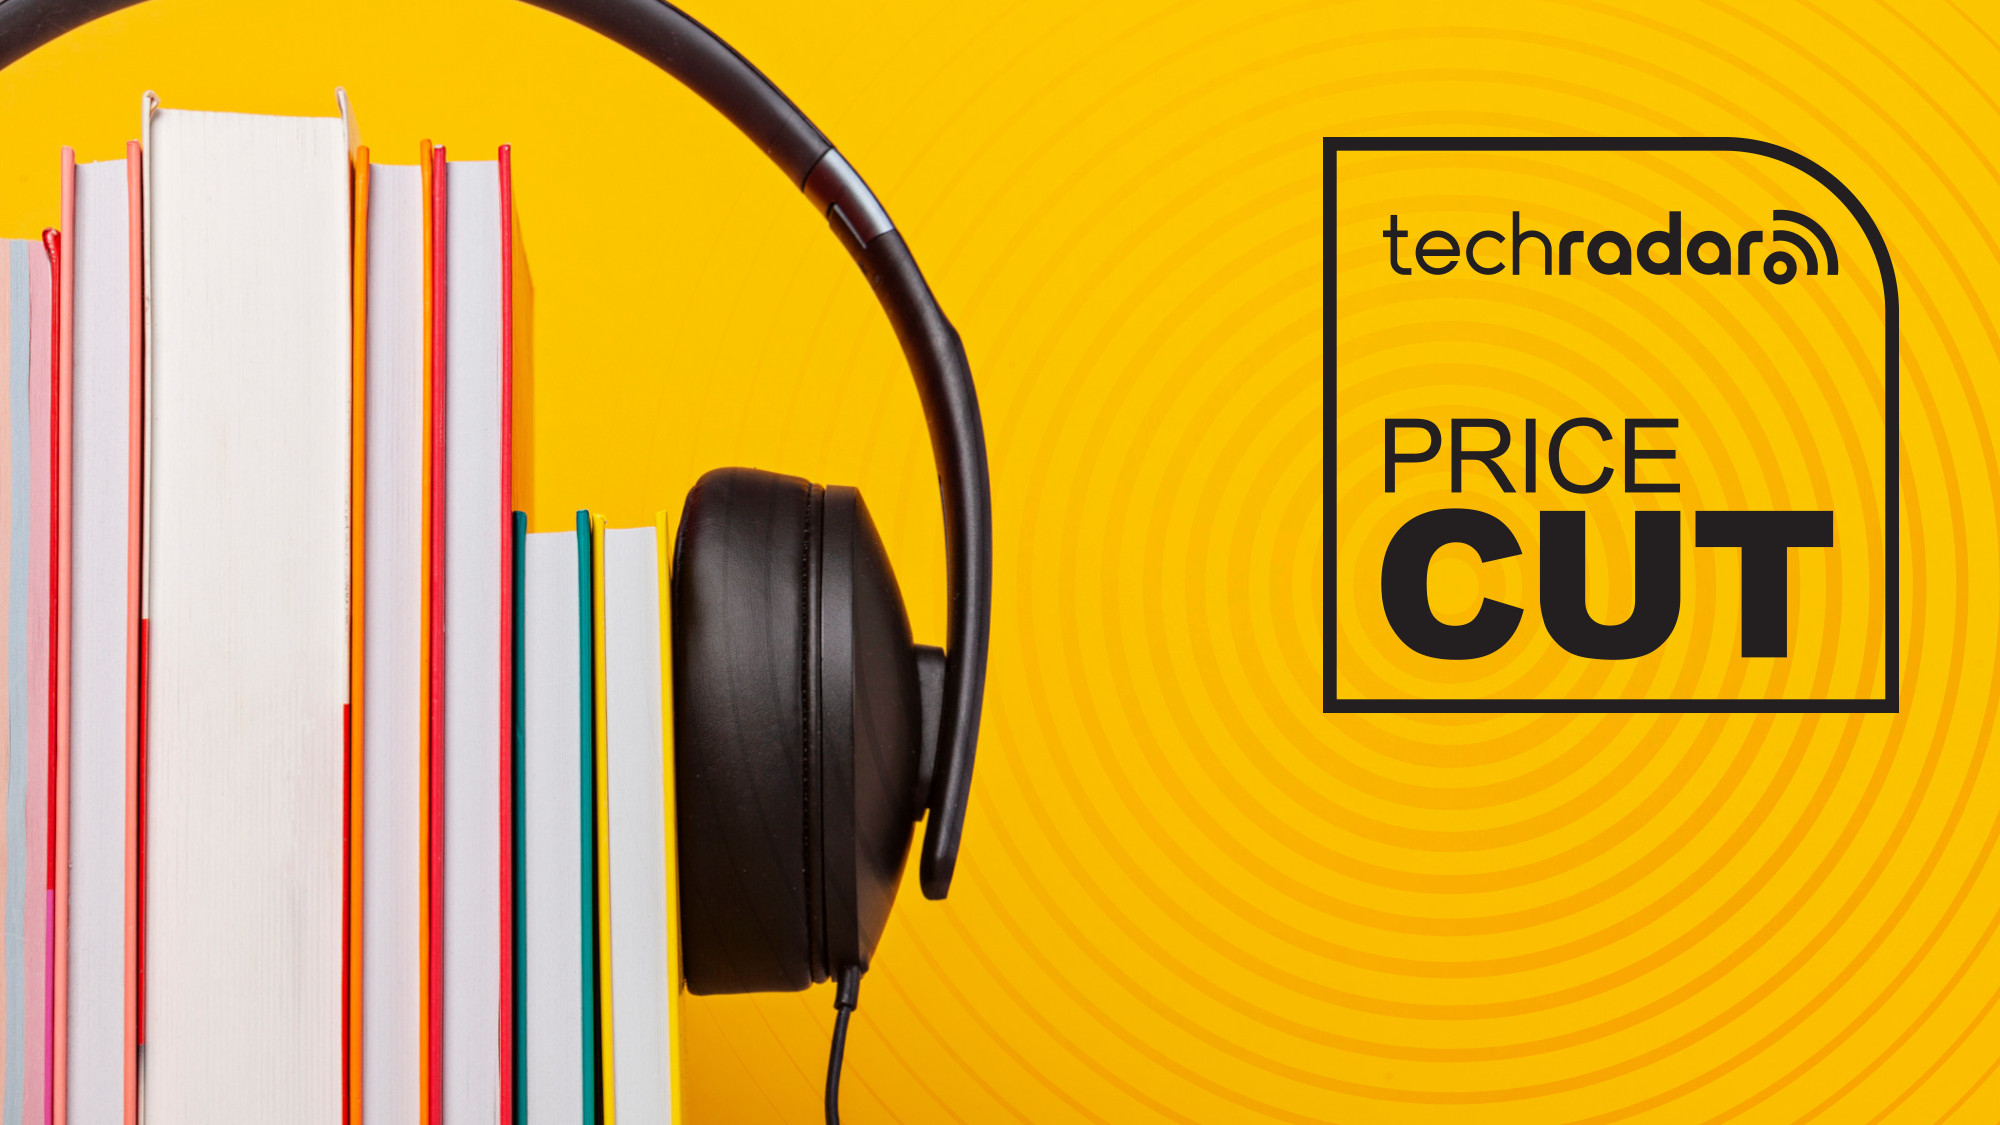 Attention book lovers: get three months of Audible for just £9 ahead of Black Friday